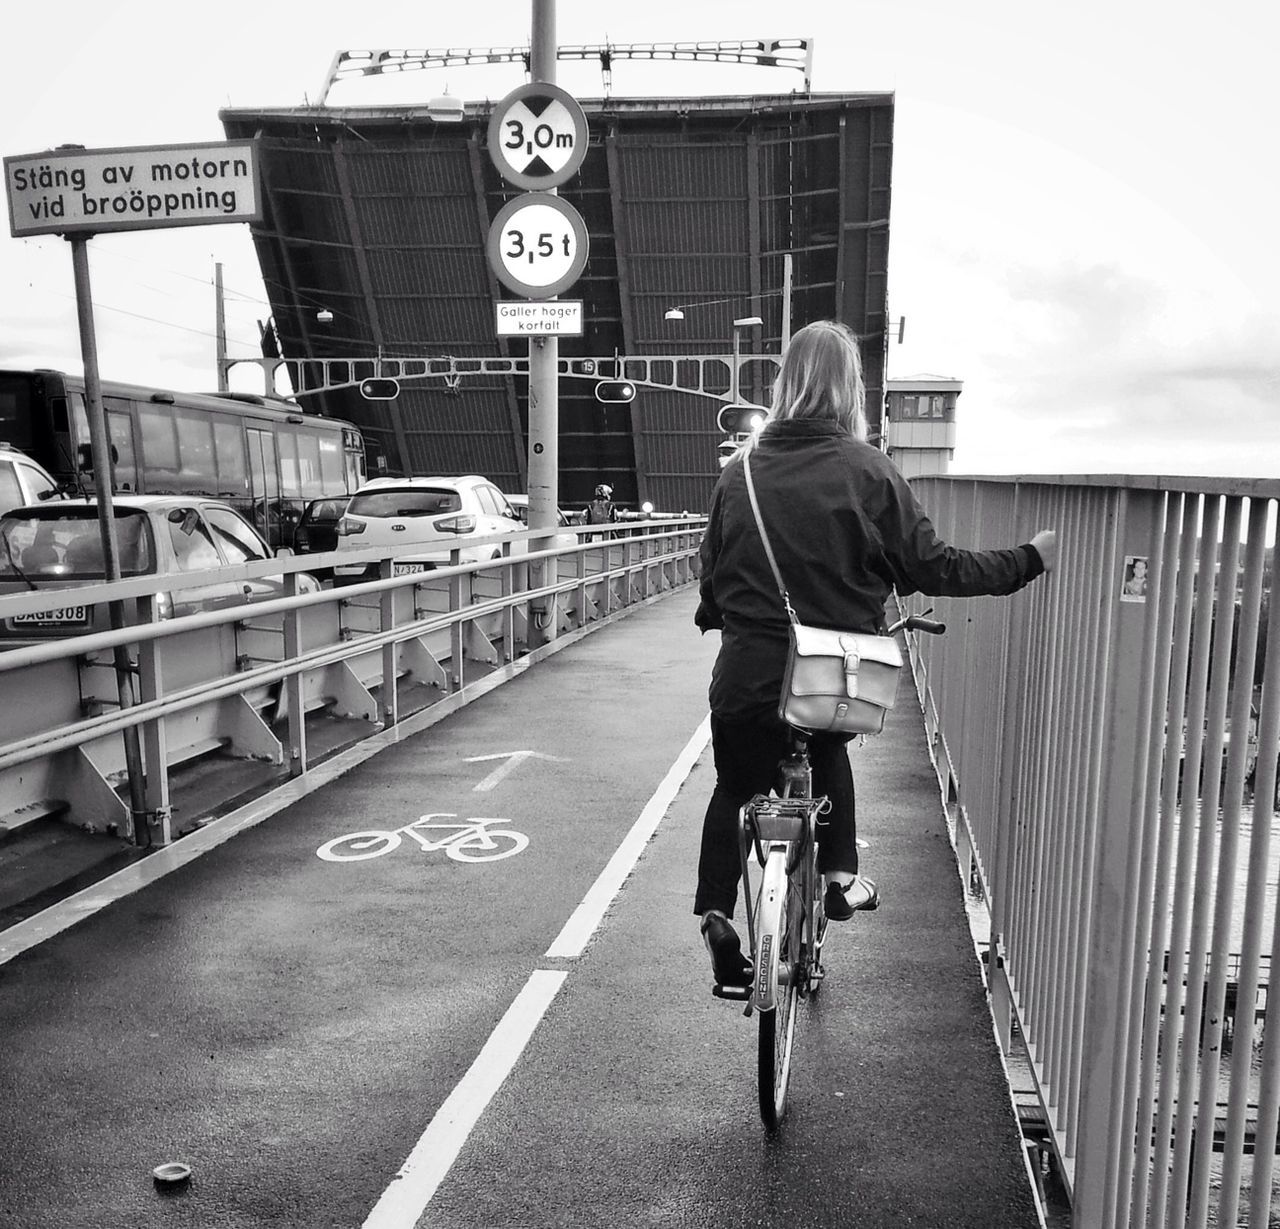 Rear view of woman riding bicycling on road along railings